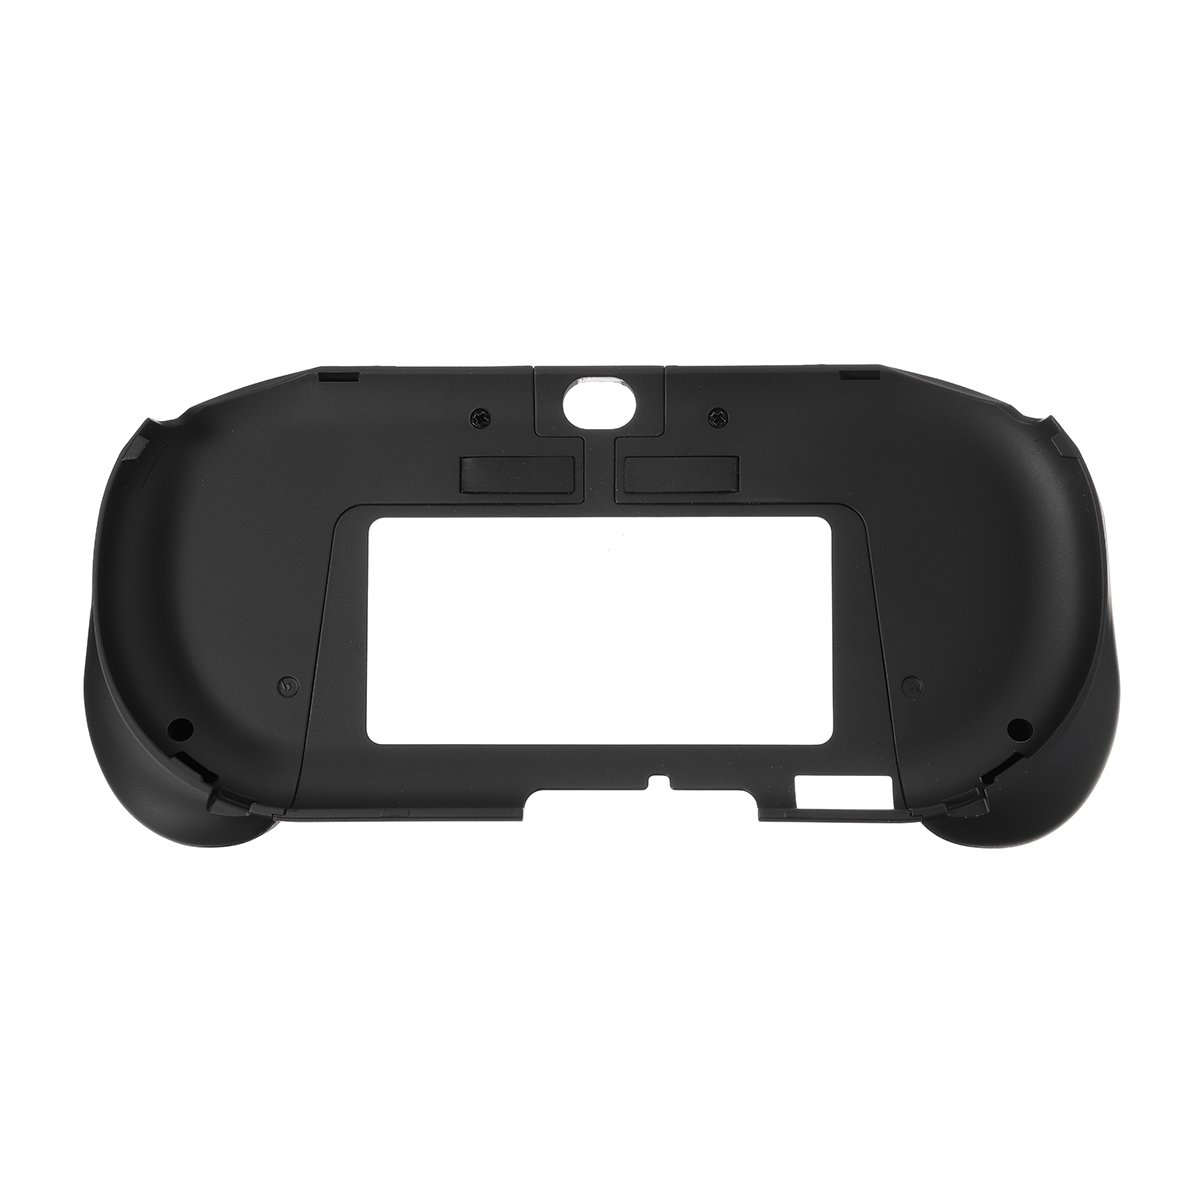 L2 R2 Trigger Grips Handle Shell Protective Case for Sony PlayStation PS Vita 2000 Game Console 1